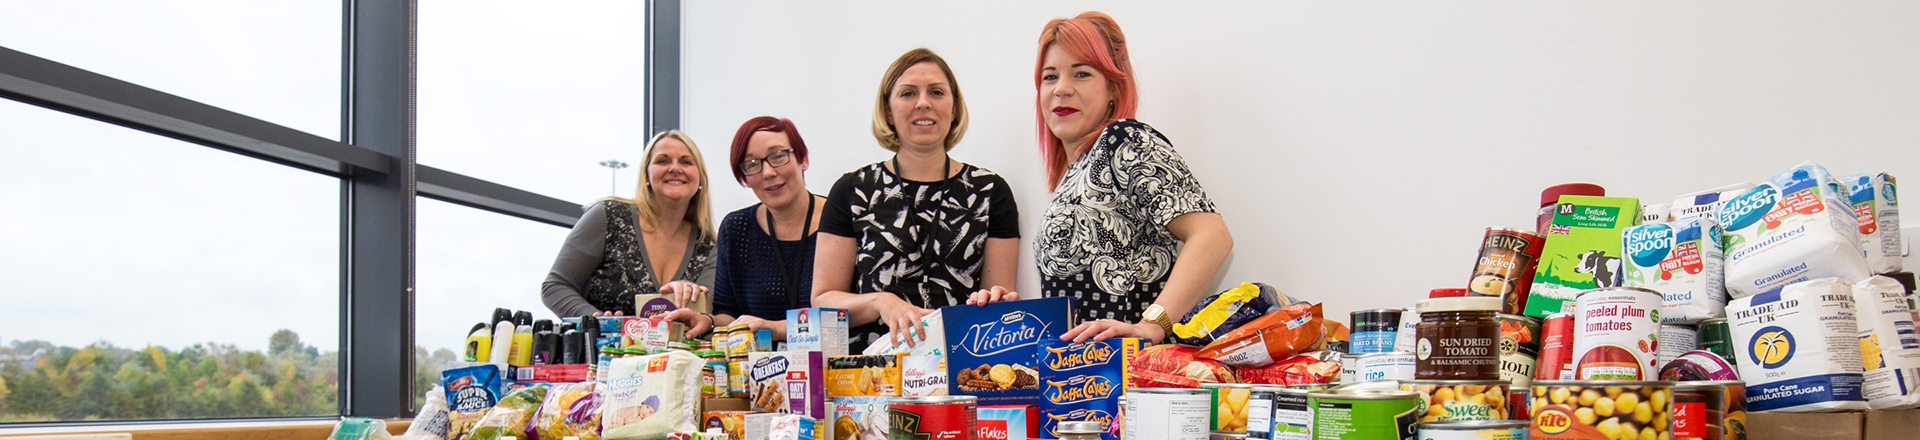 Staff collecting for local food banks